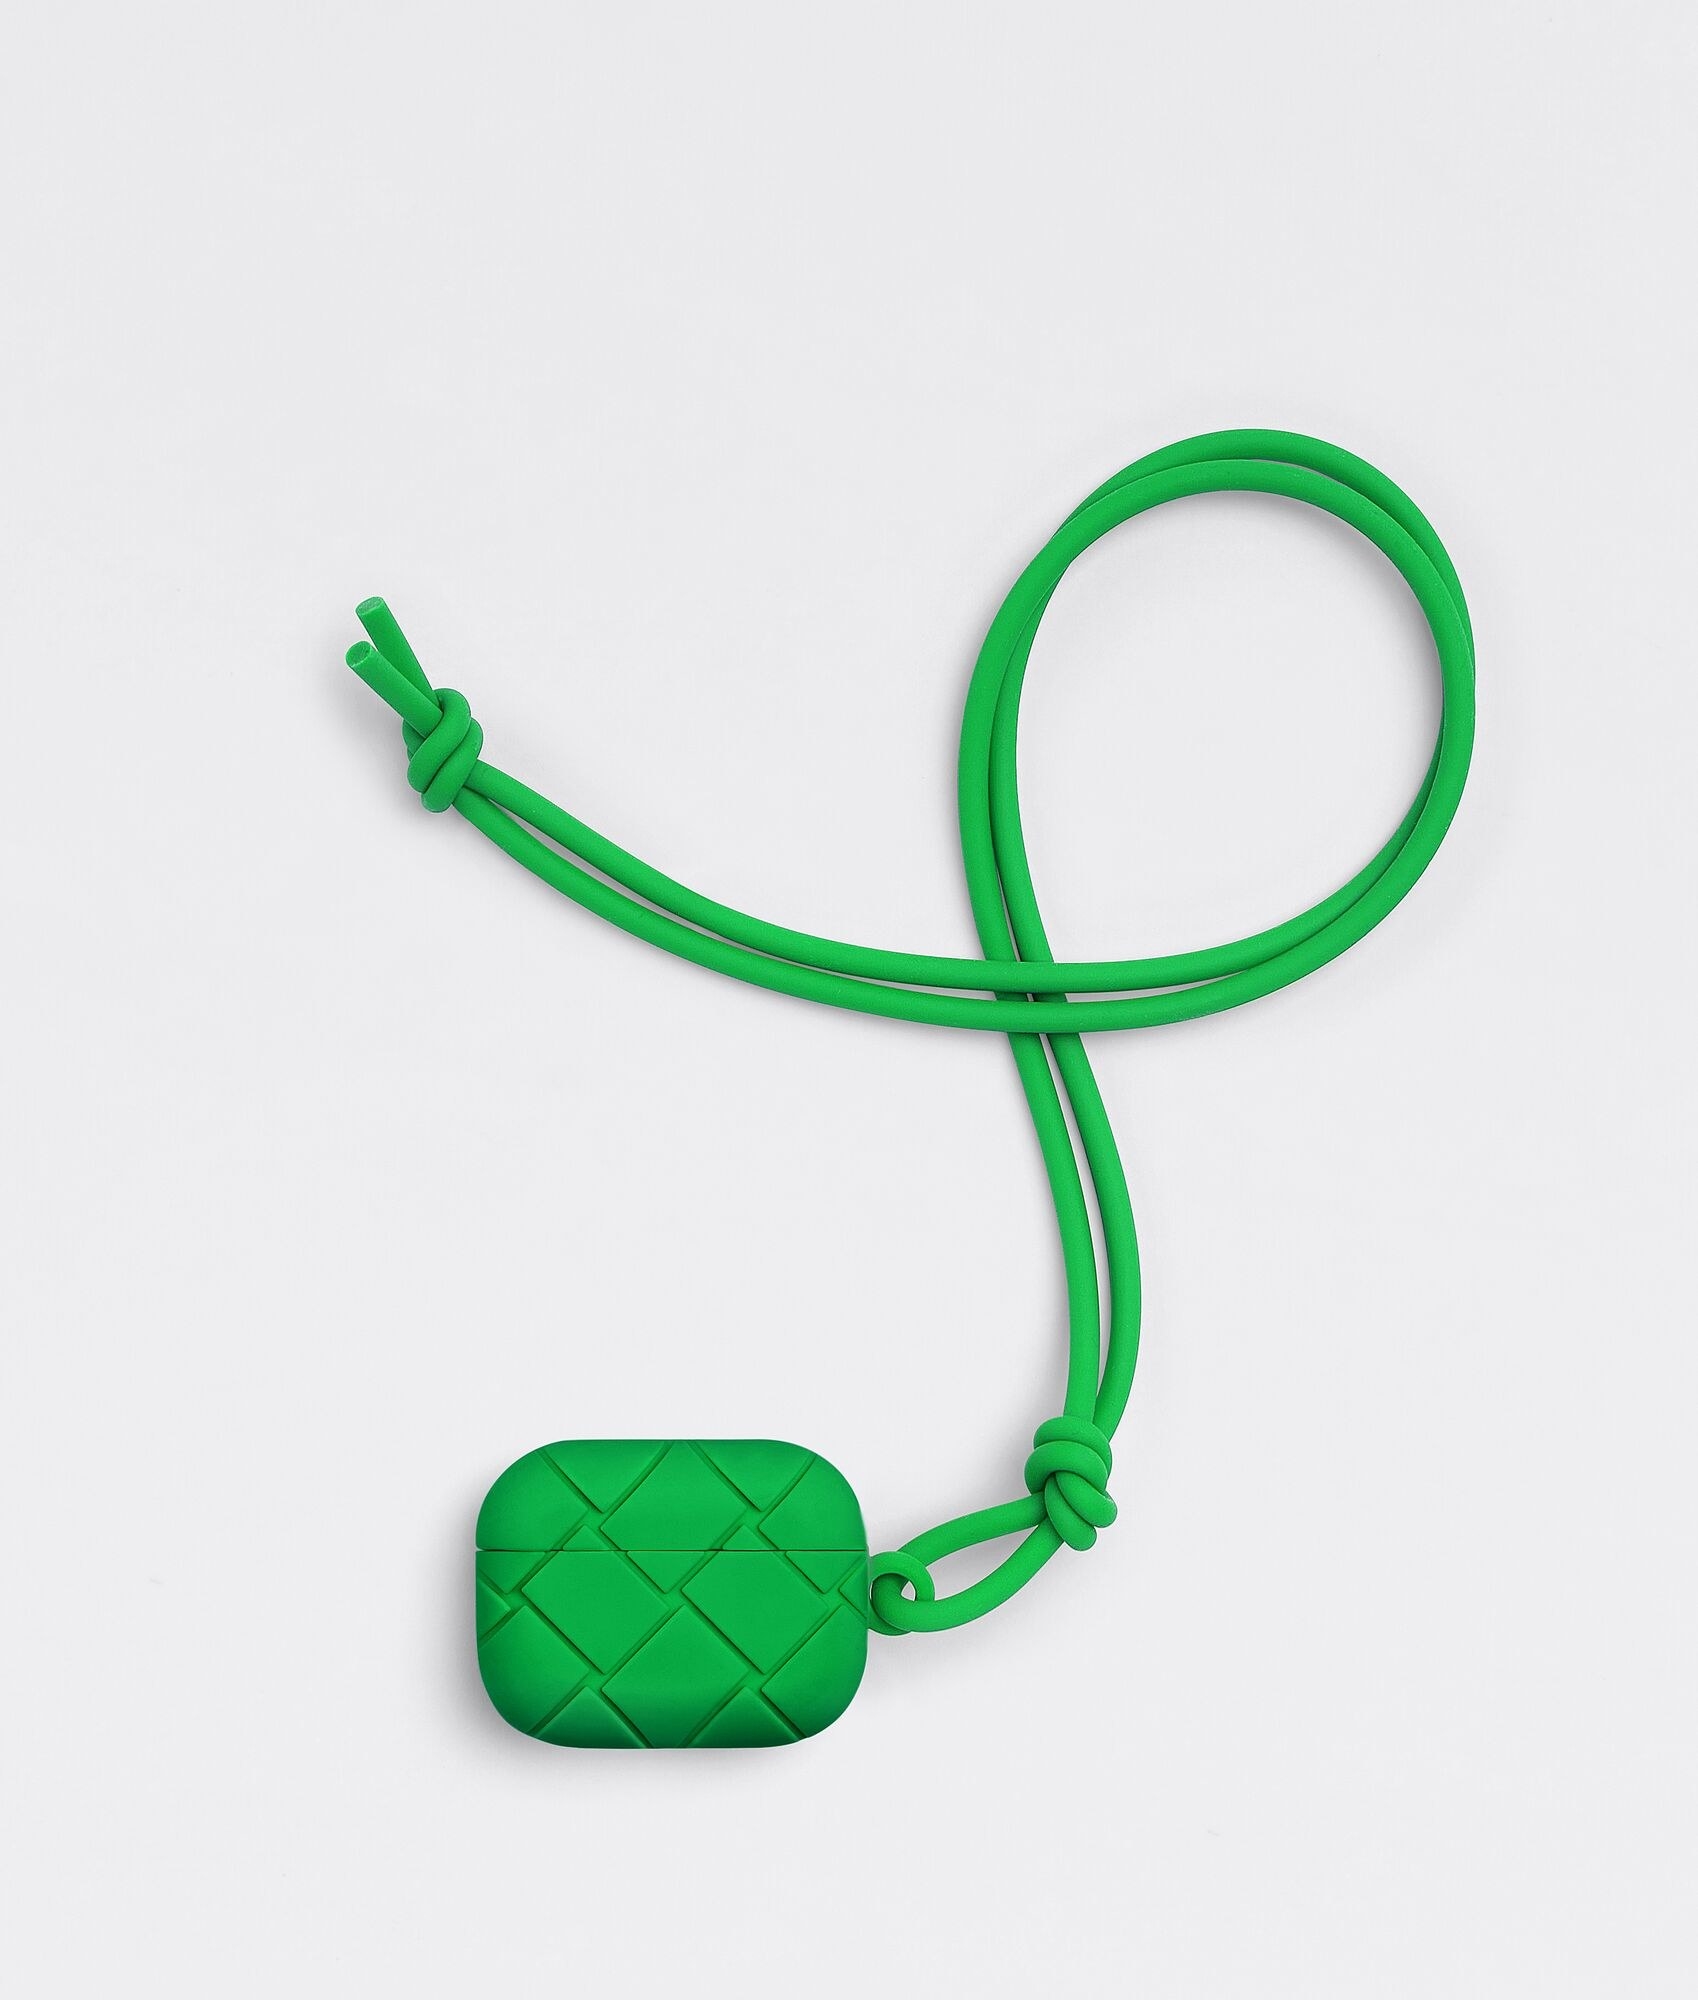 The green case with strap